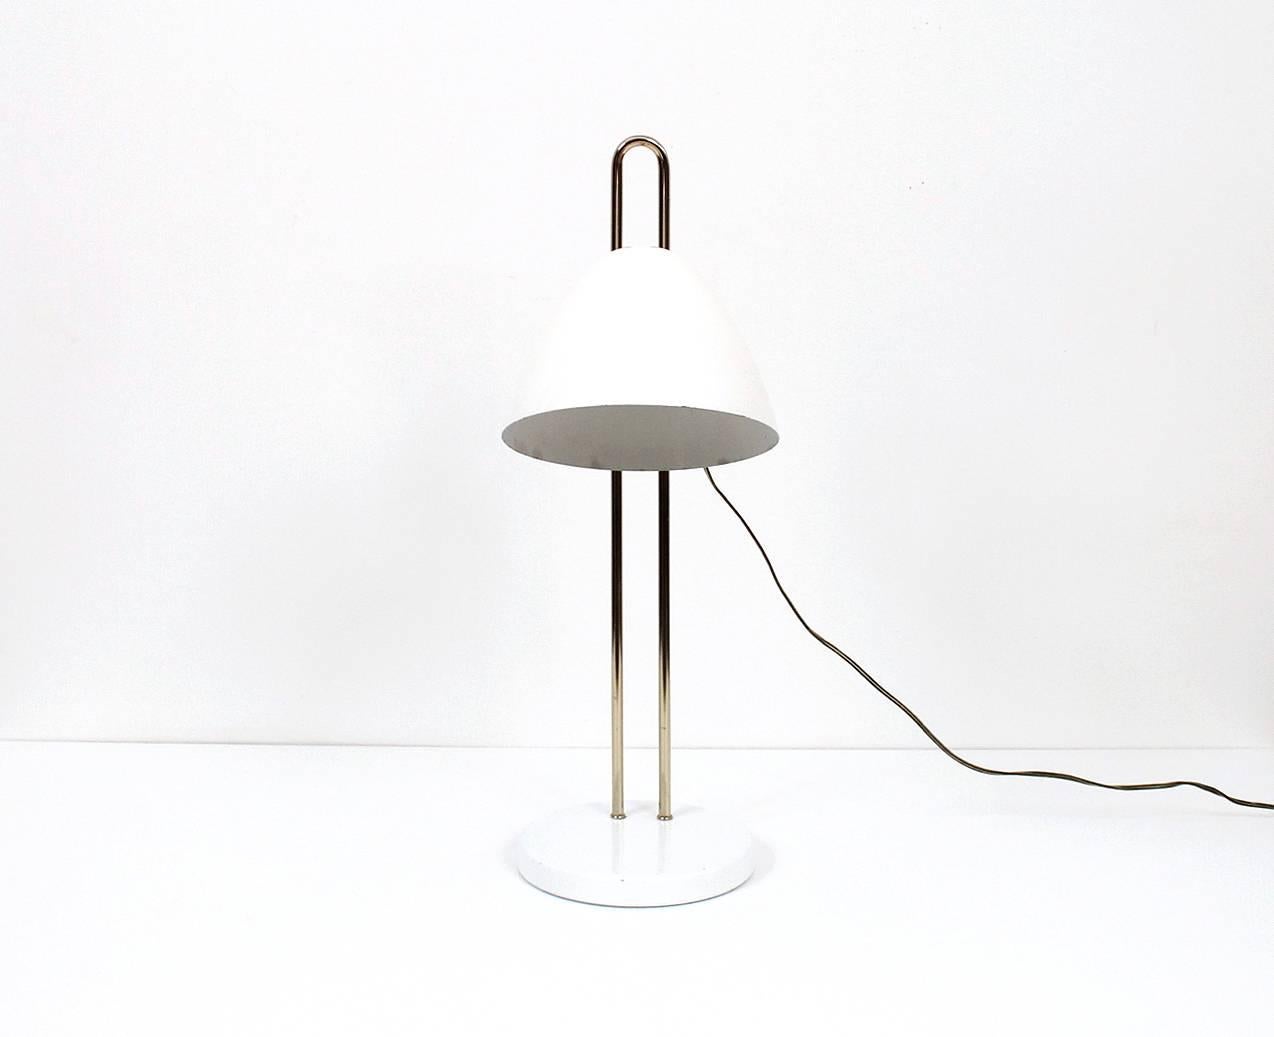 Seldom seem table or desk lamp by Lightolier. Lamp features a pivoting white enameled shade and brass components. The shade can also be adjusted for height up or down the vertical brass fork. Ingenious design and build reminiscent of Italian desk